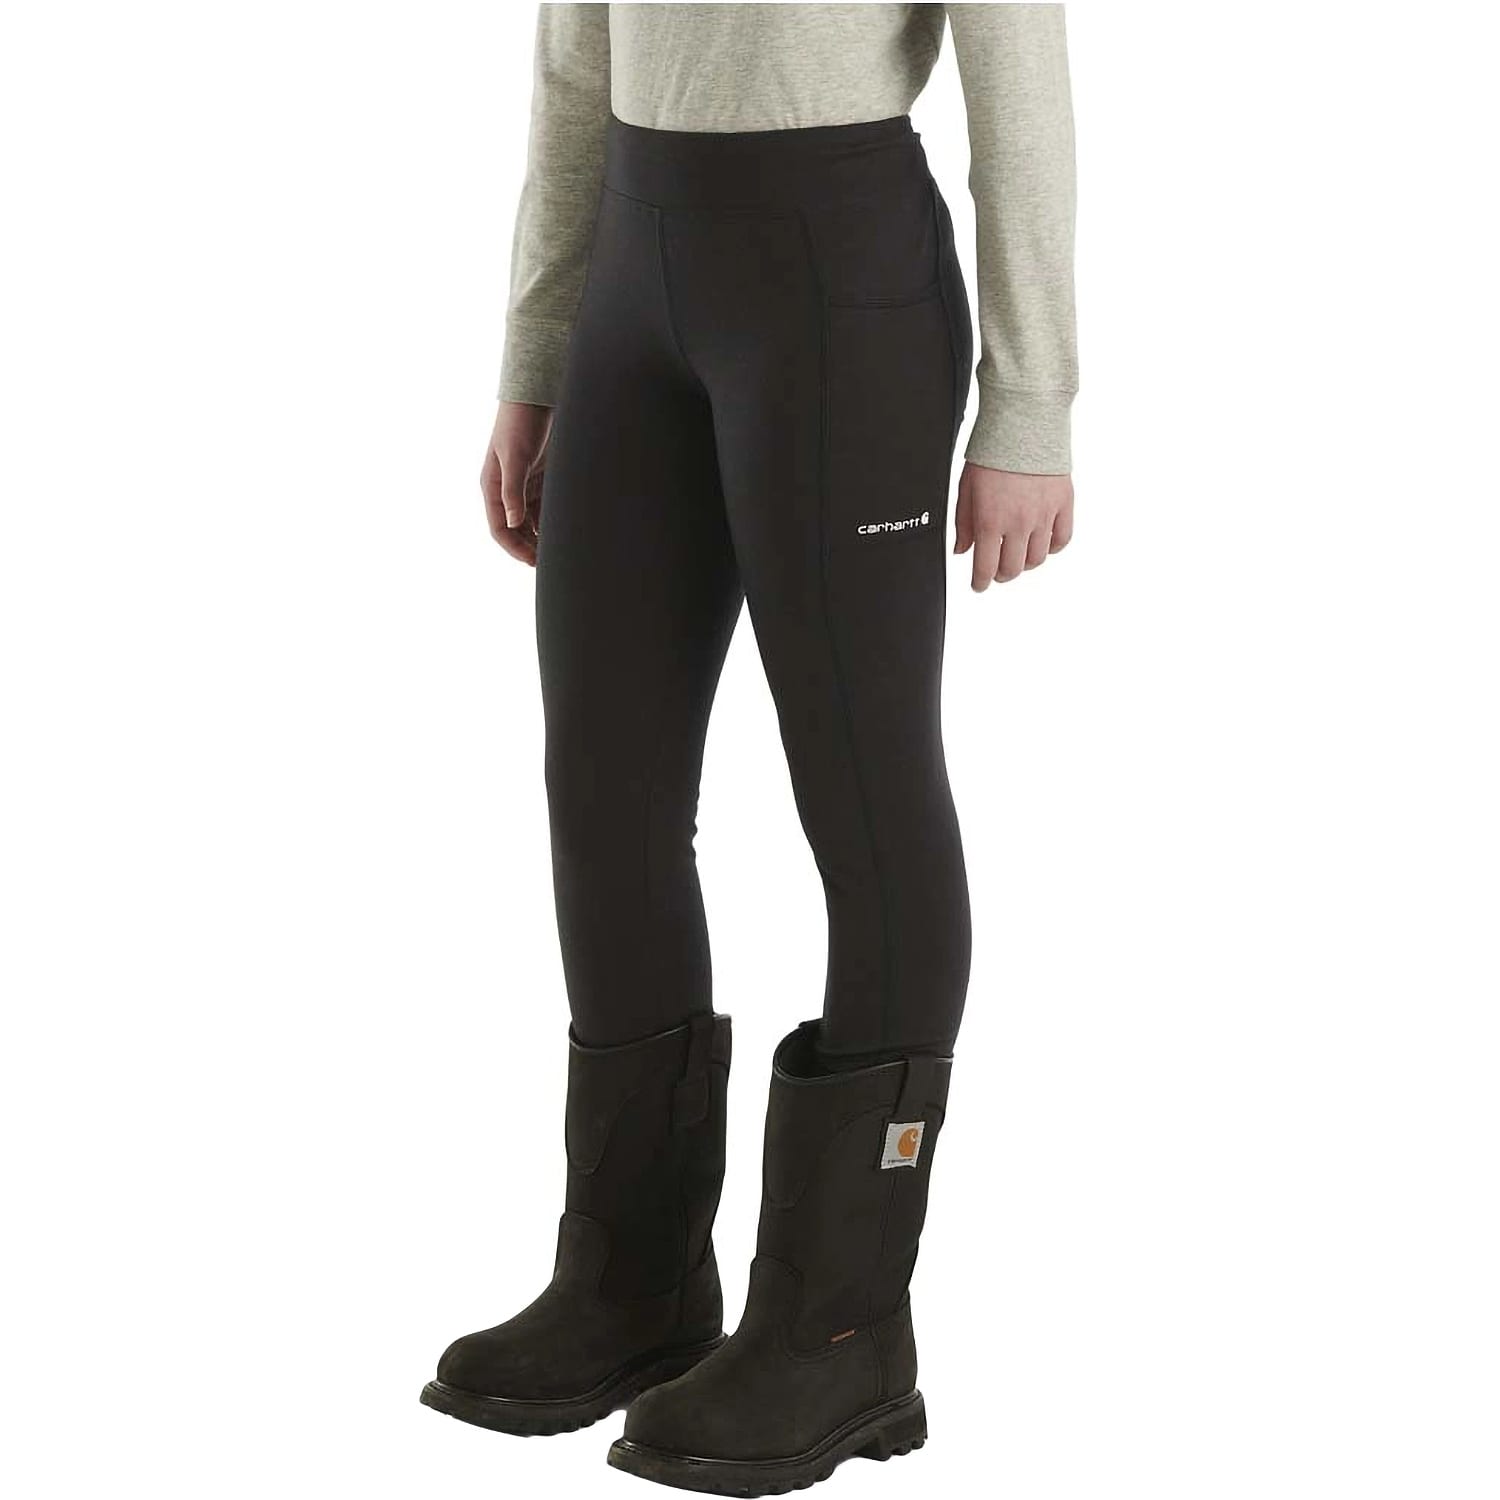 Carhartt launches leggings for women - Electrical Contracting News (ECN)